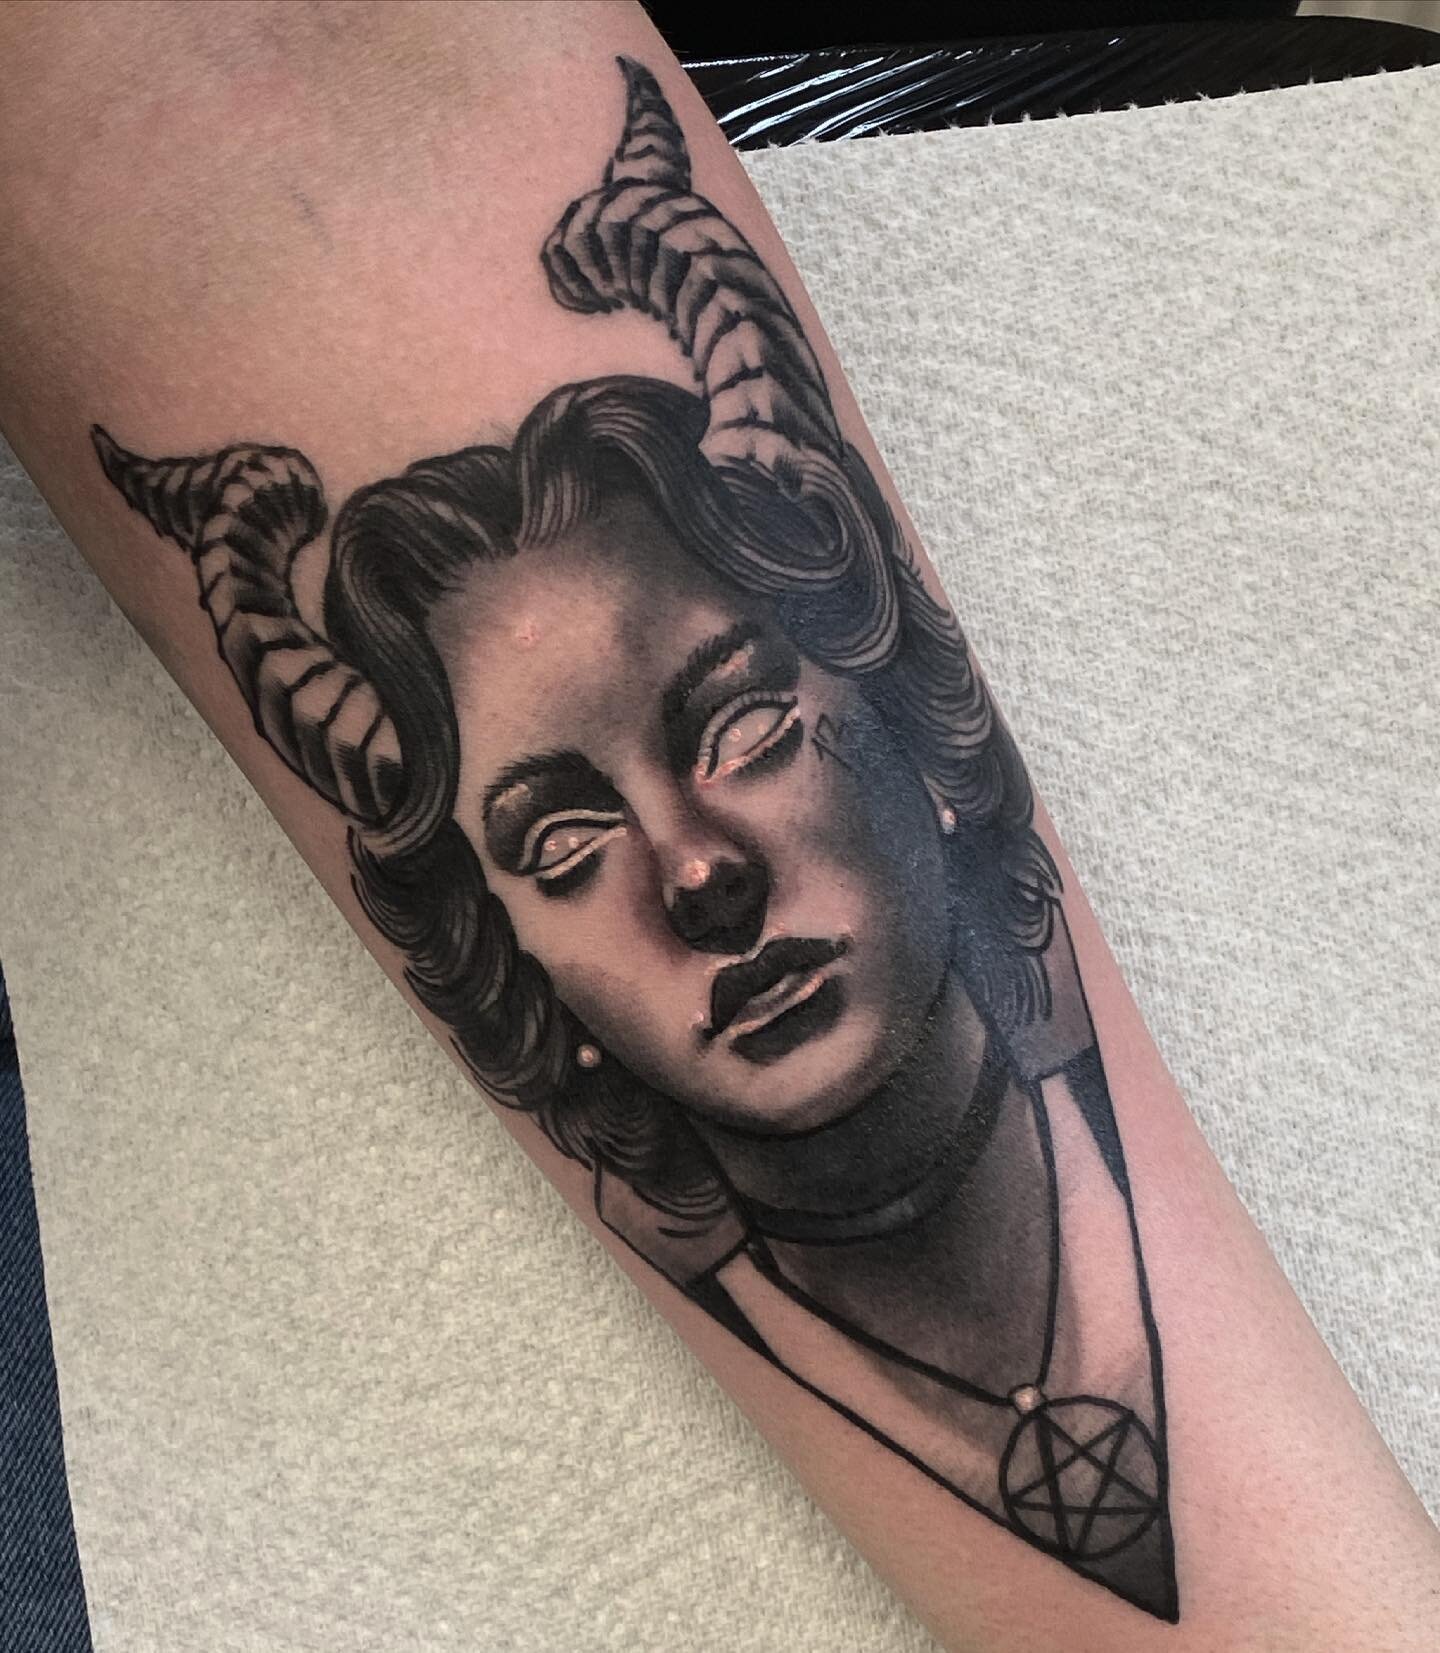 Some black and grey Neo Traditional for my little sister Cheyenne.